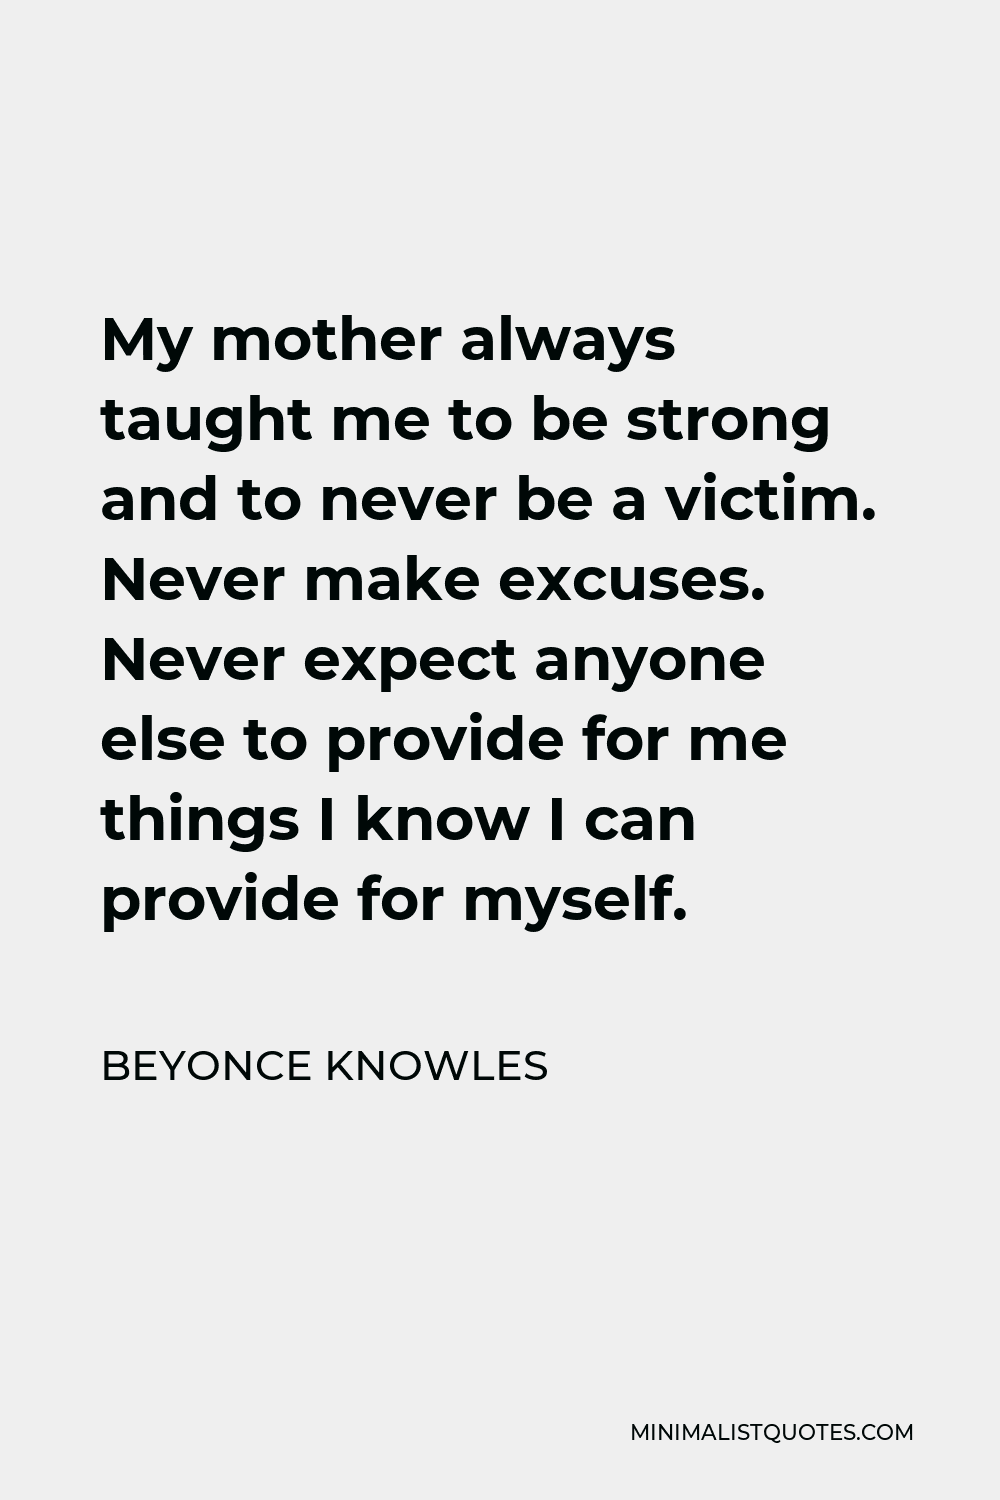 Beyonce Knowles Quote - My mother always taught me to be strong and to never be a victim. Never make excuses. Never expect anyone else to provide for me things I know I can provide for myself.